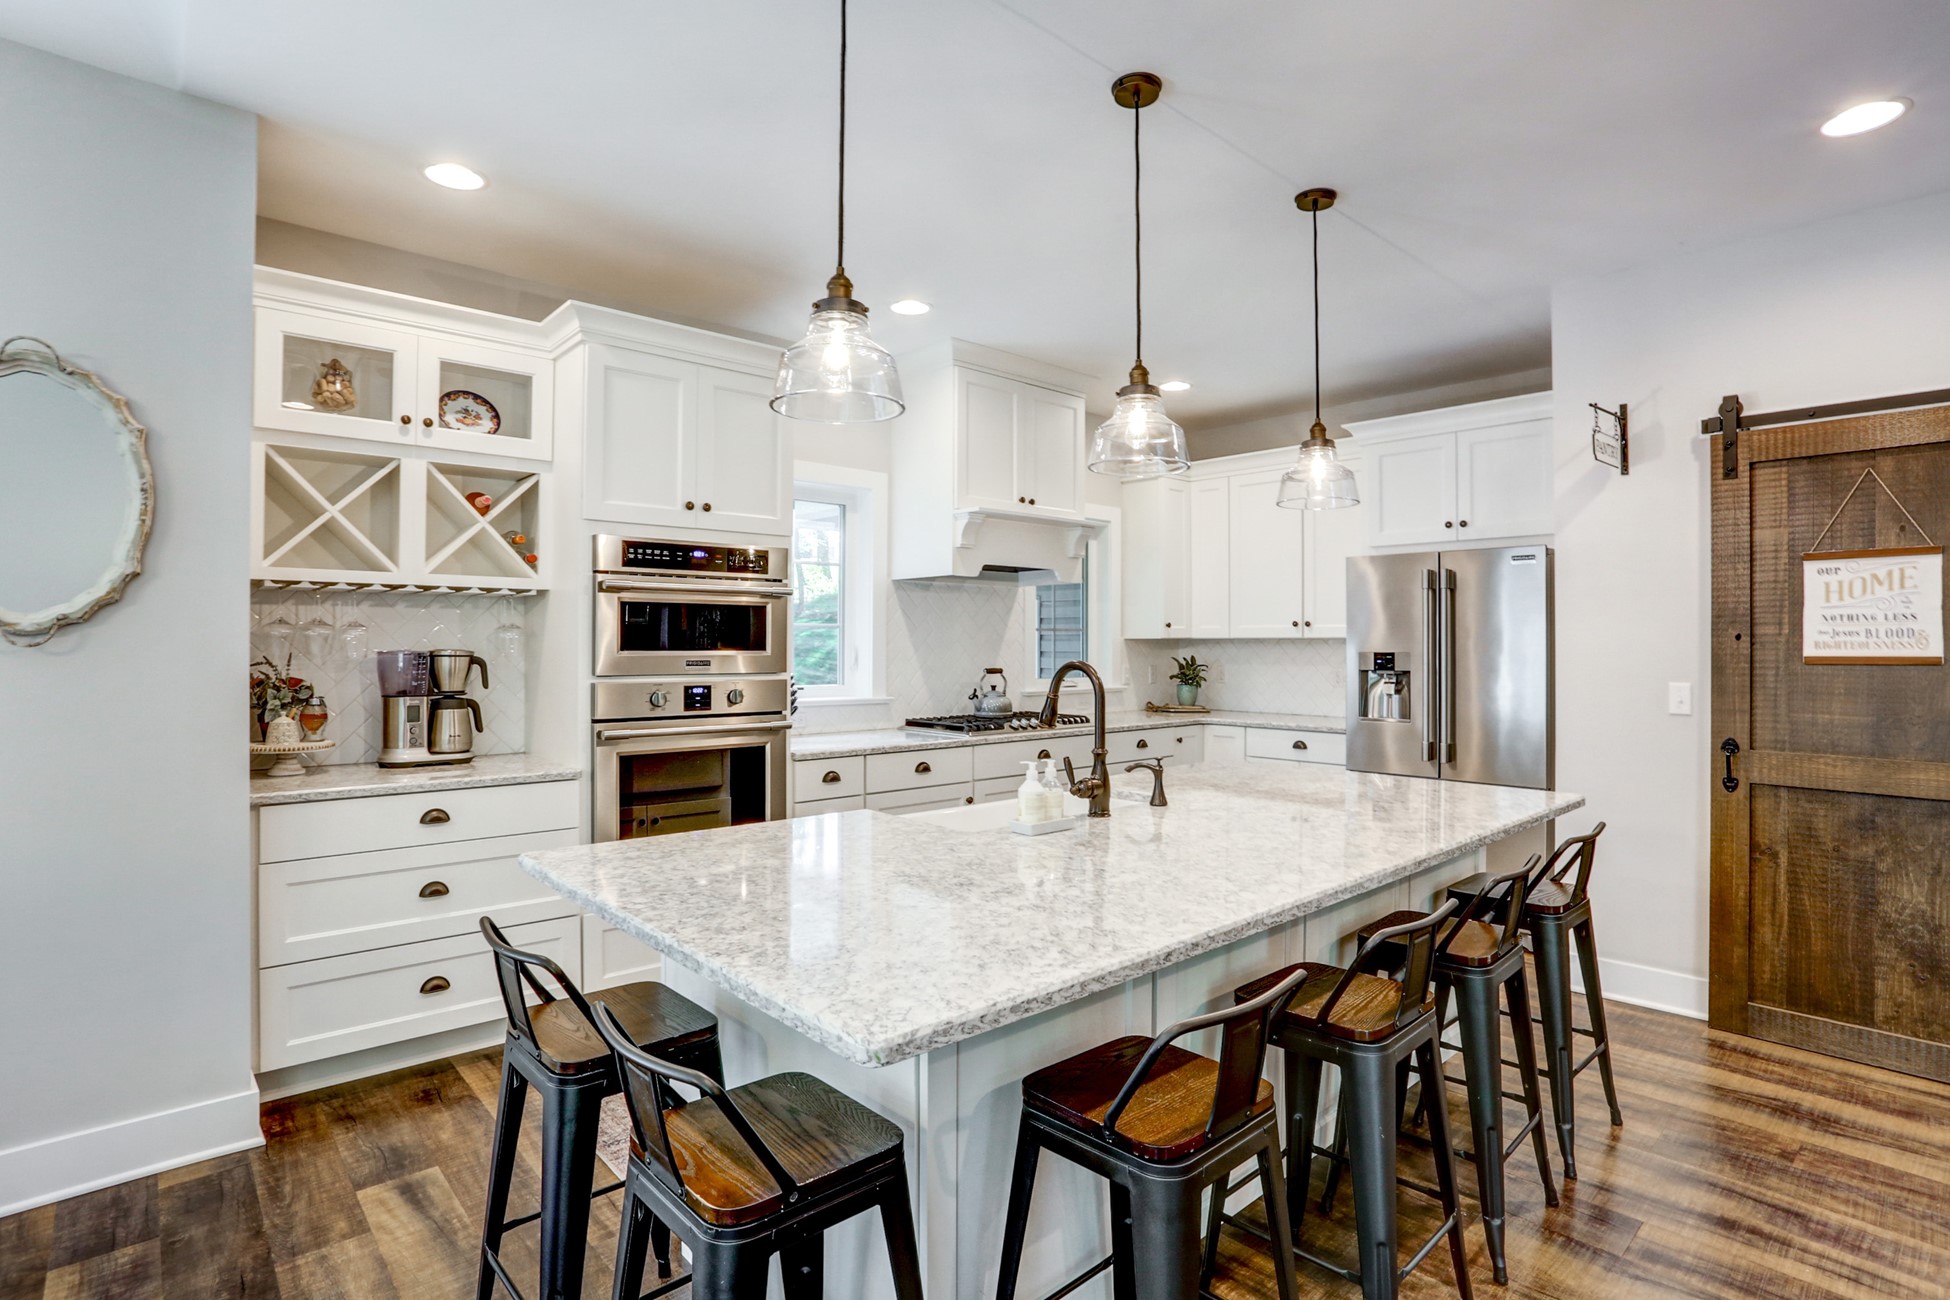 12 Fabulous Kitchen Island Ideas For Your Remodel